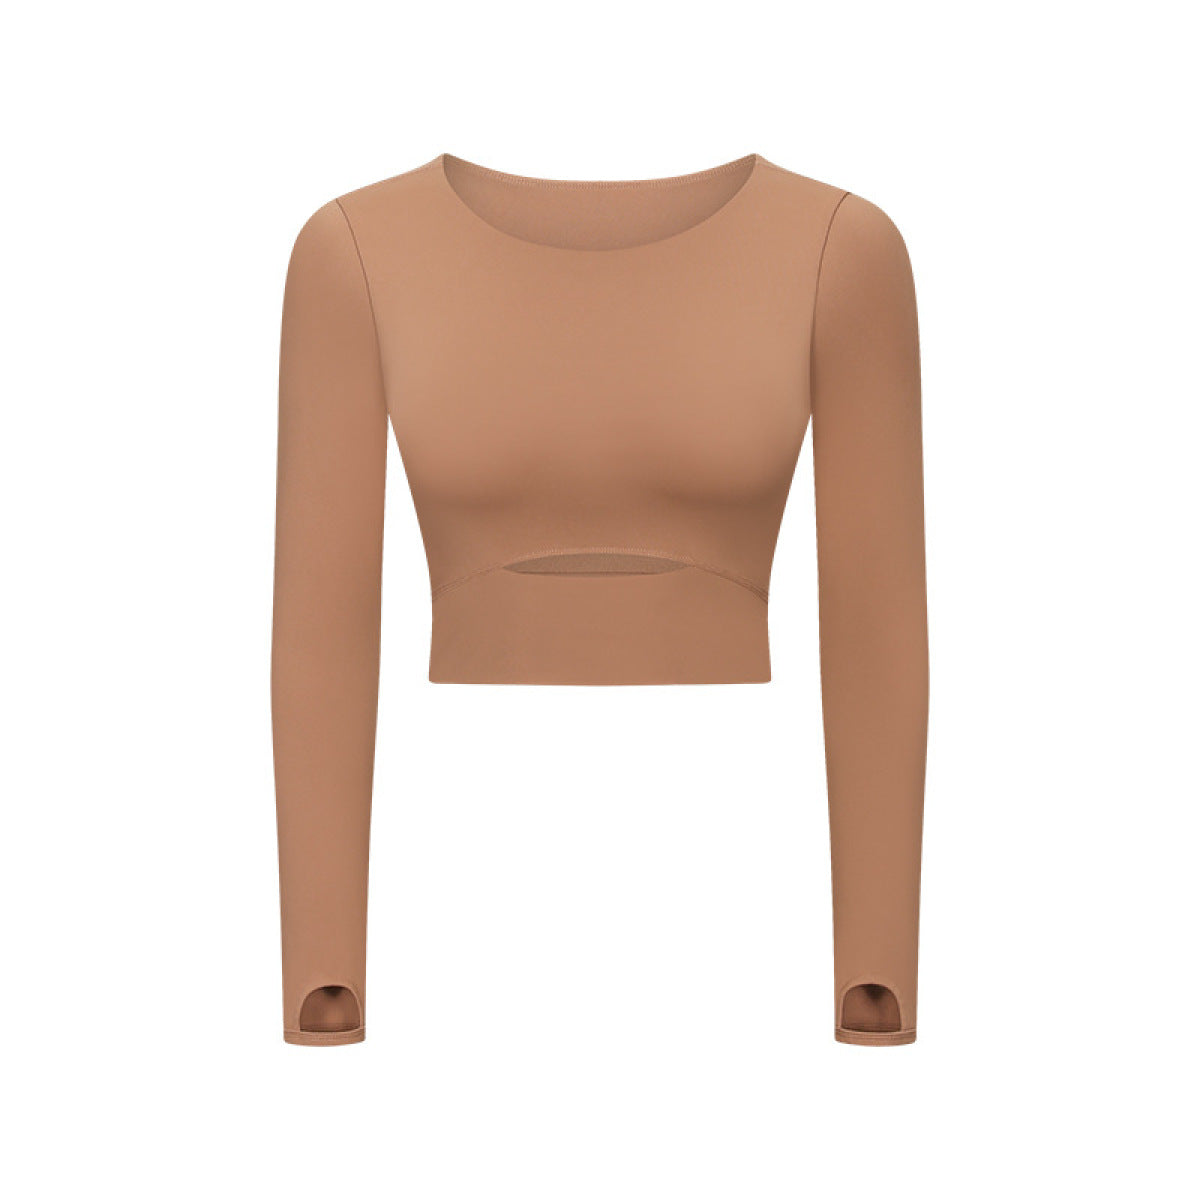 Semi-Short Cut Out Long-Sleeved Active Tops With Chest Pad